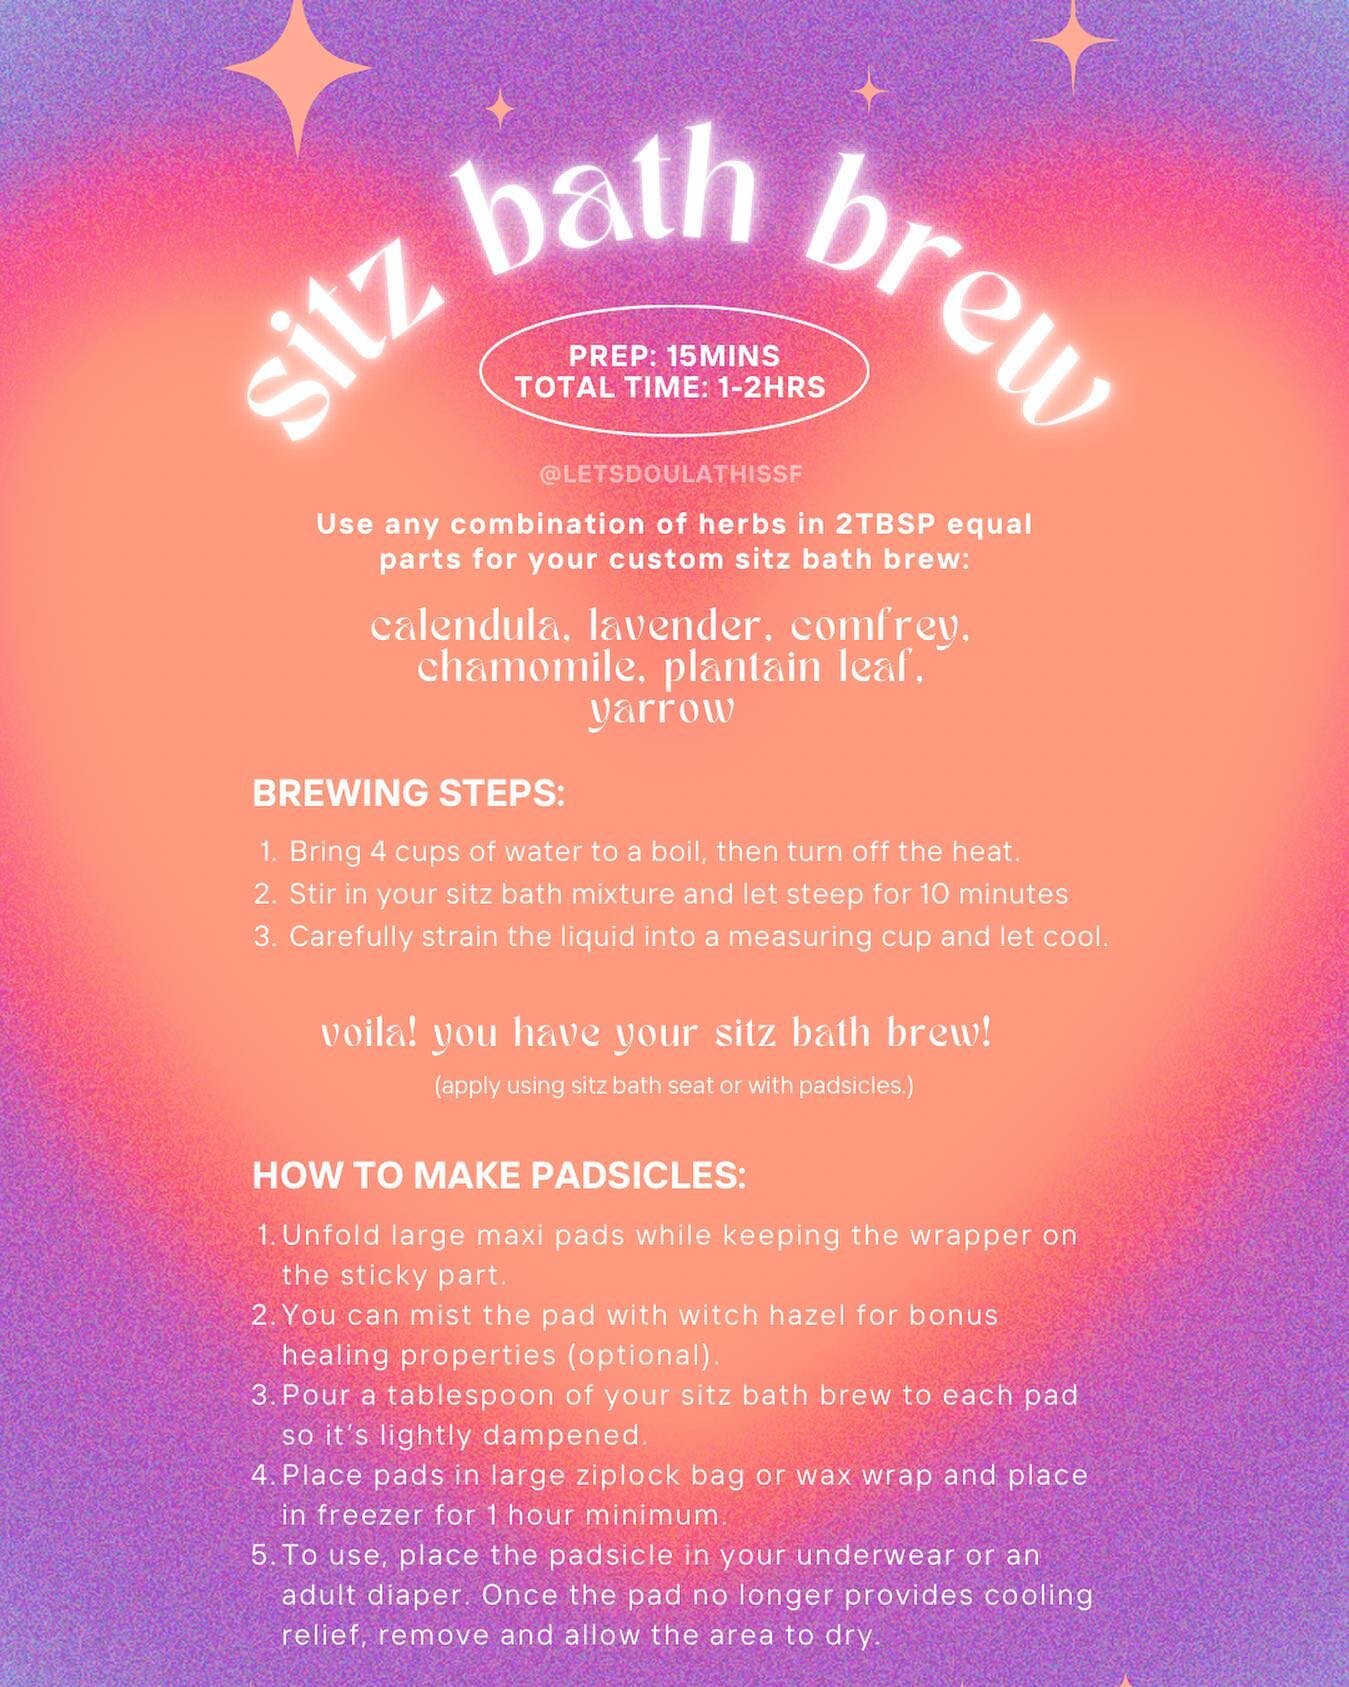 ✨Let&rsquo;s talk sitz baths! ✨

What are they? How do they work? Can I make my own? A sitz bath is a combination of soothing herbs made into a bath soak or tea like brew which is used to speed the healing of the perineum after childbirth. They are e